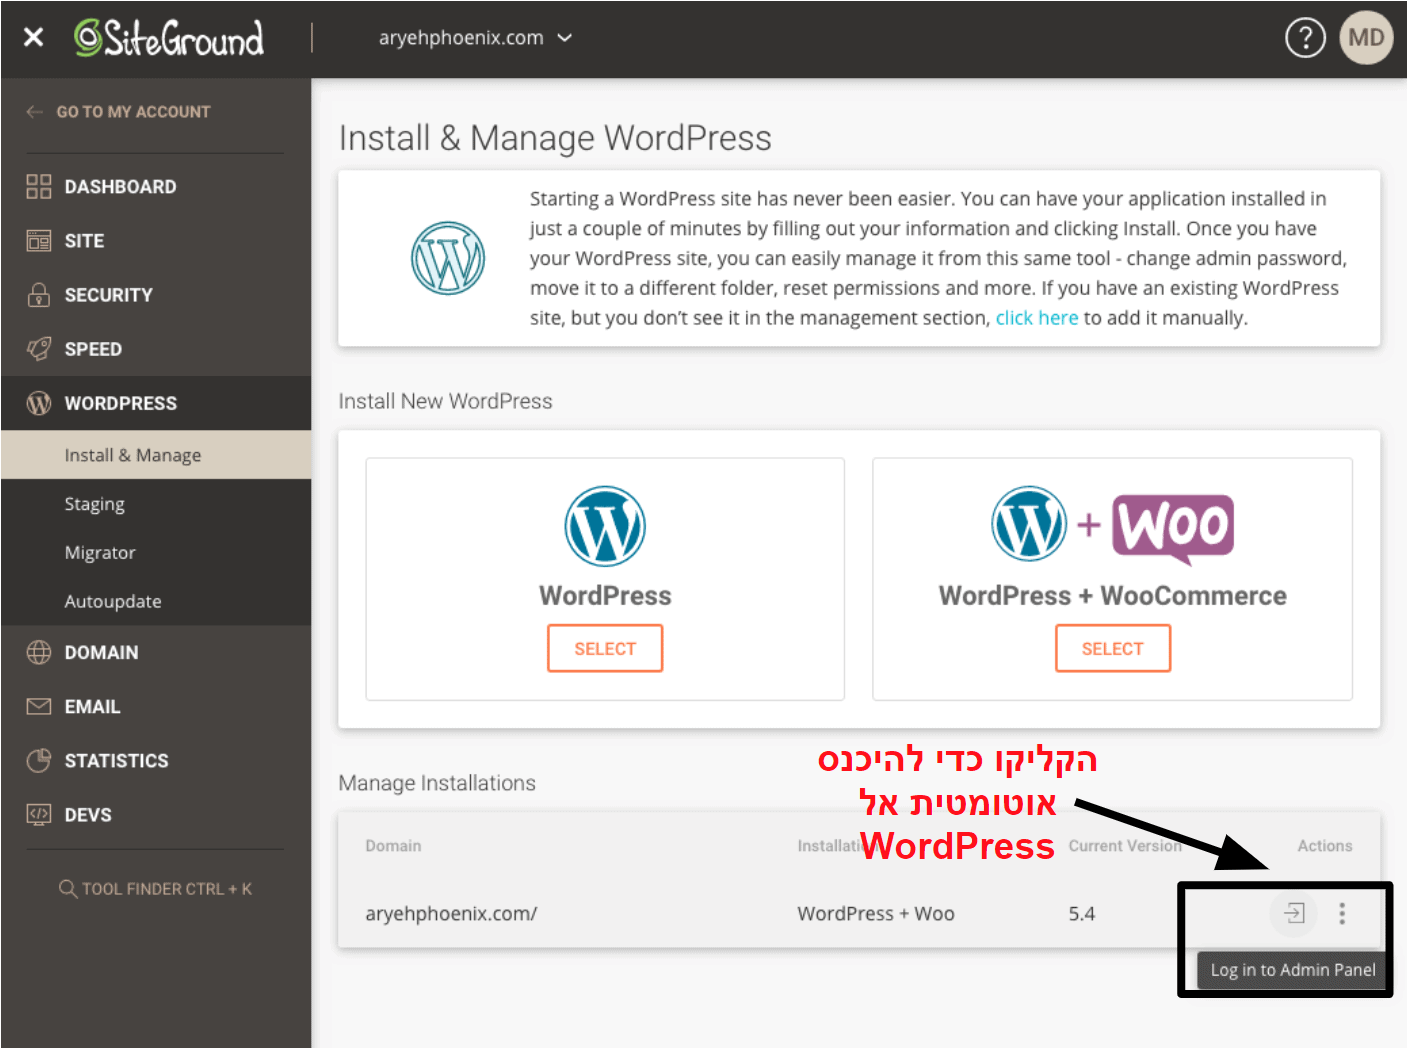 SiteGround offers a one click login option for your WordPress dashboard НЕ15